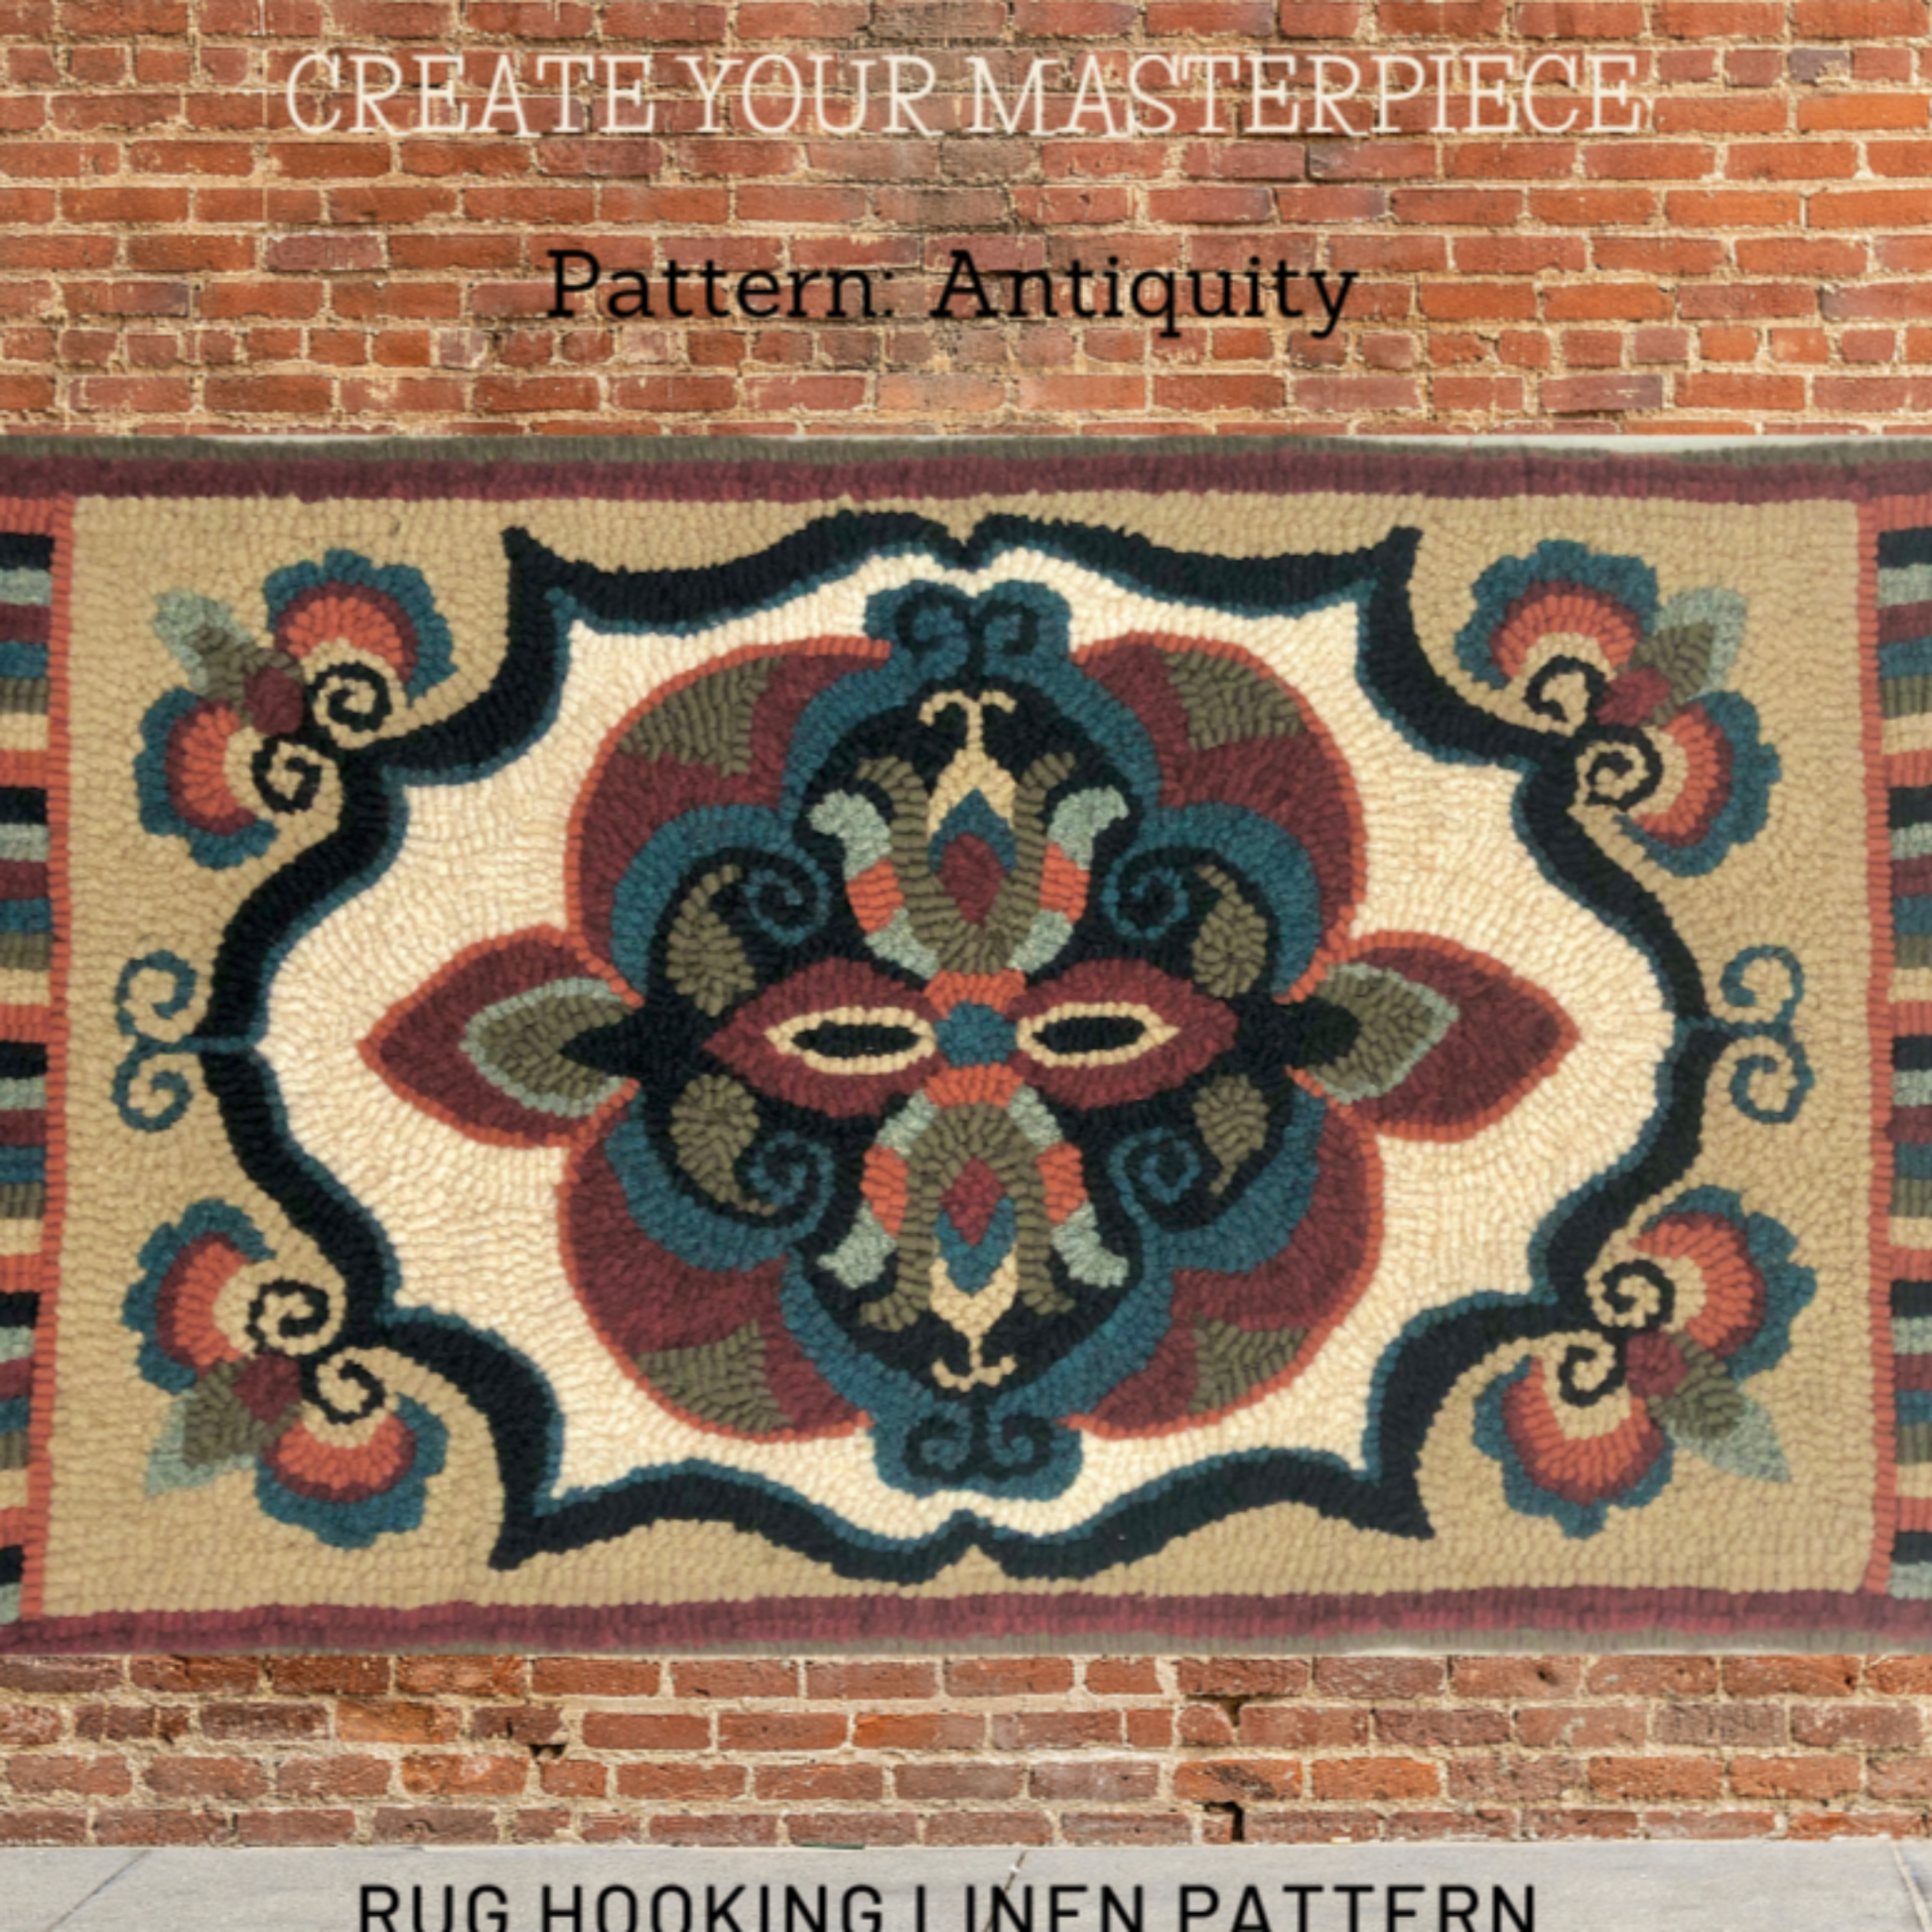 Antiquity - Rug Hooking pattern on Linen, Design By Orphaned Wool